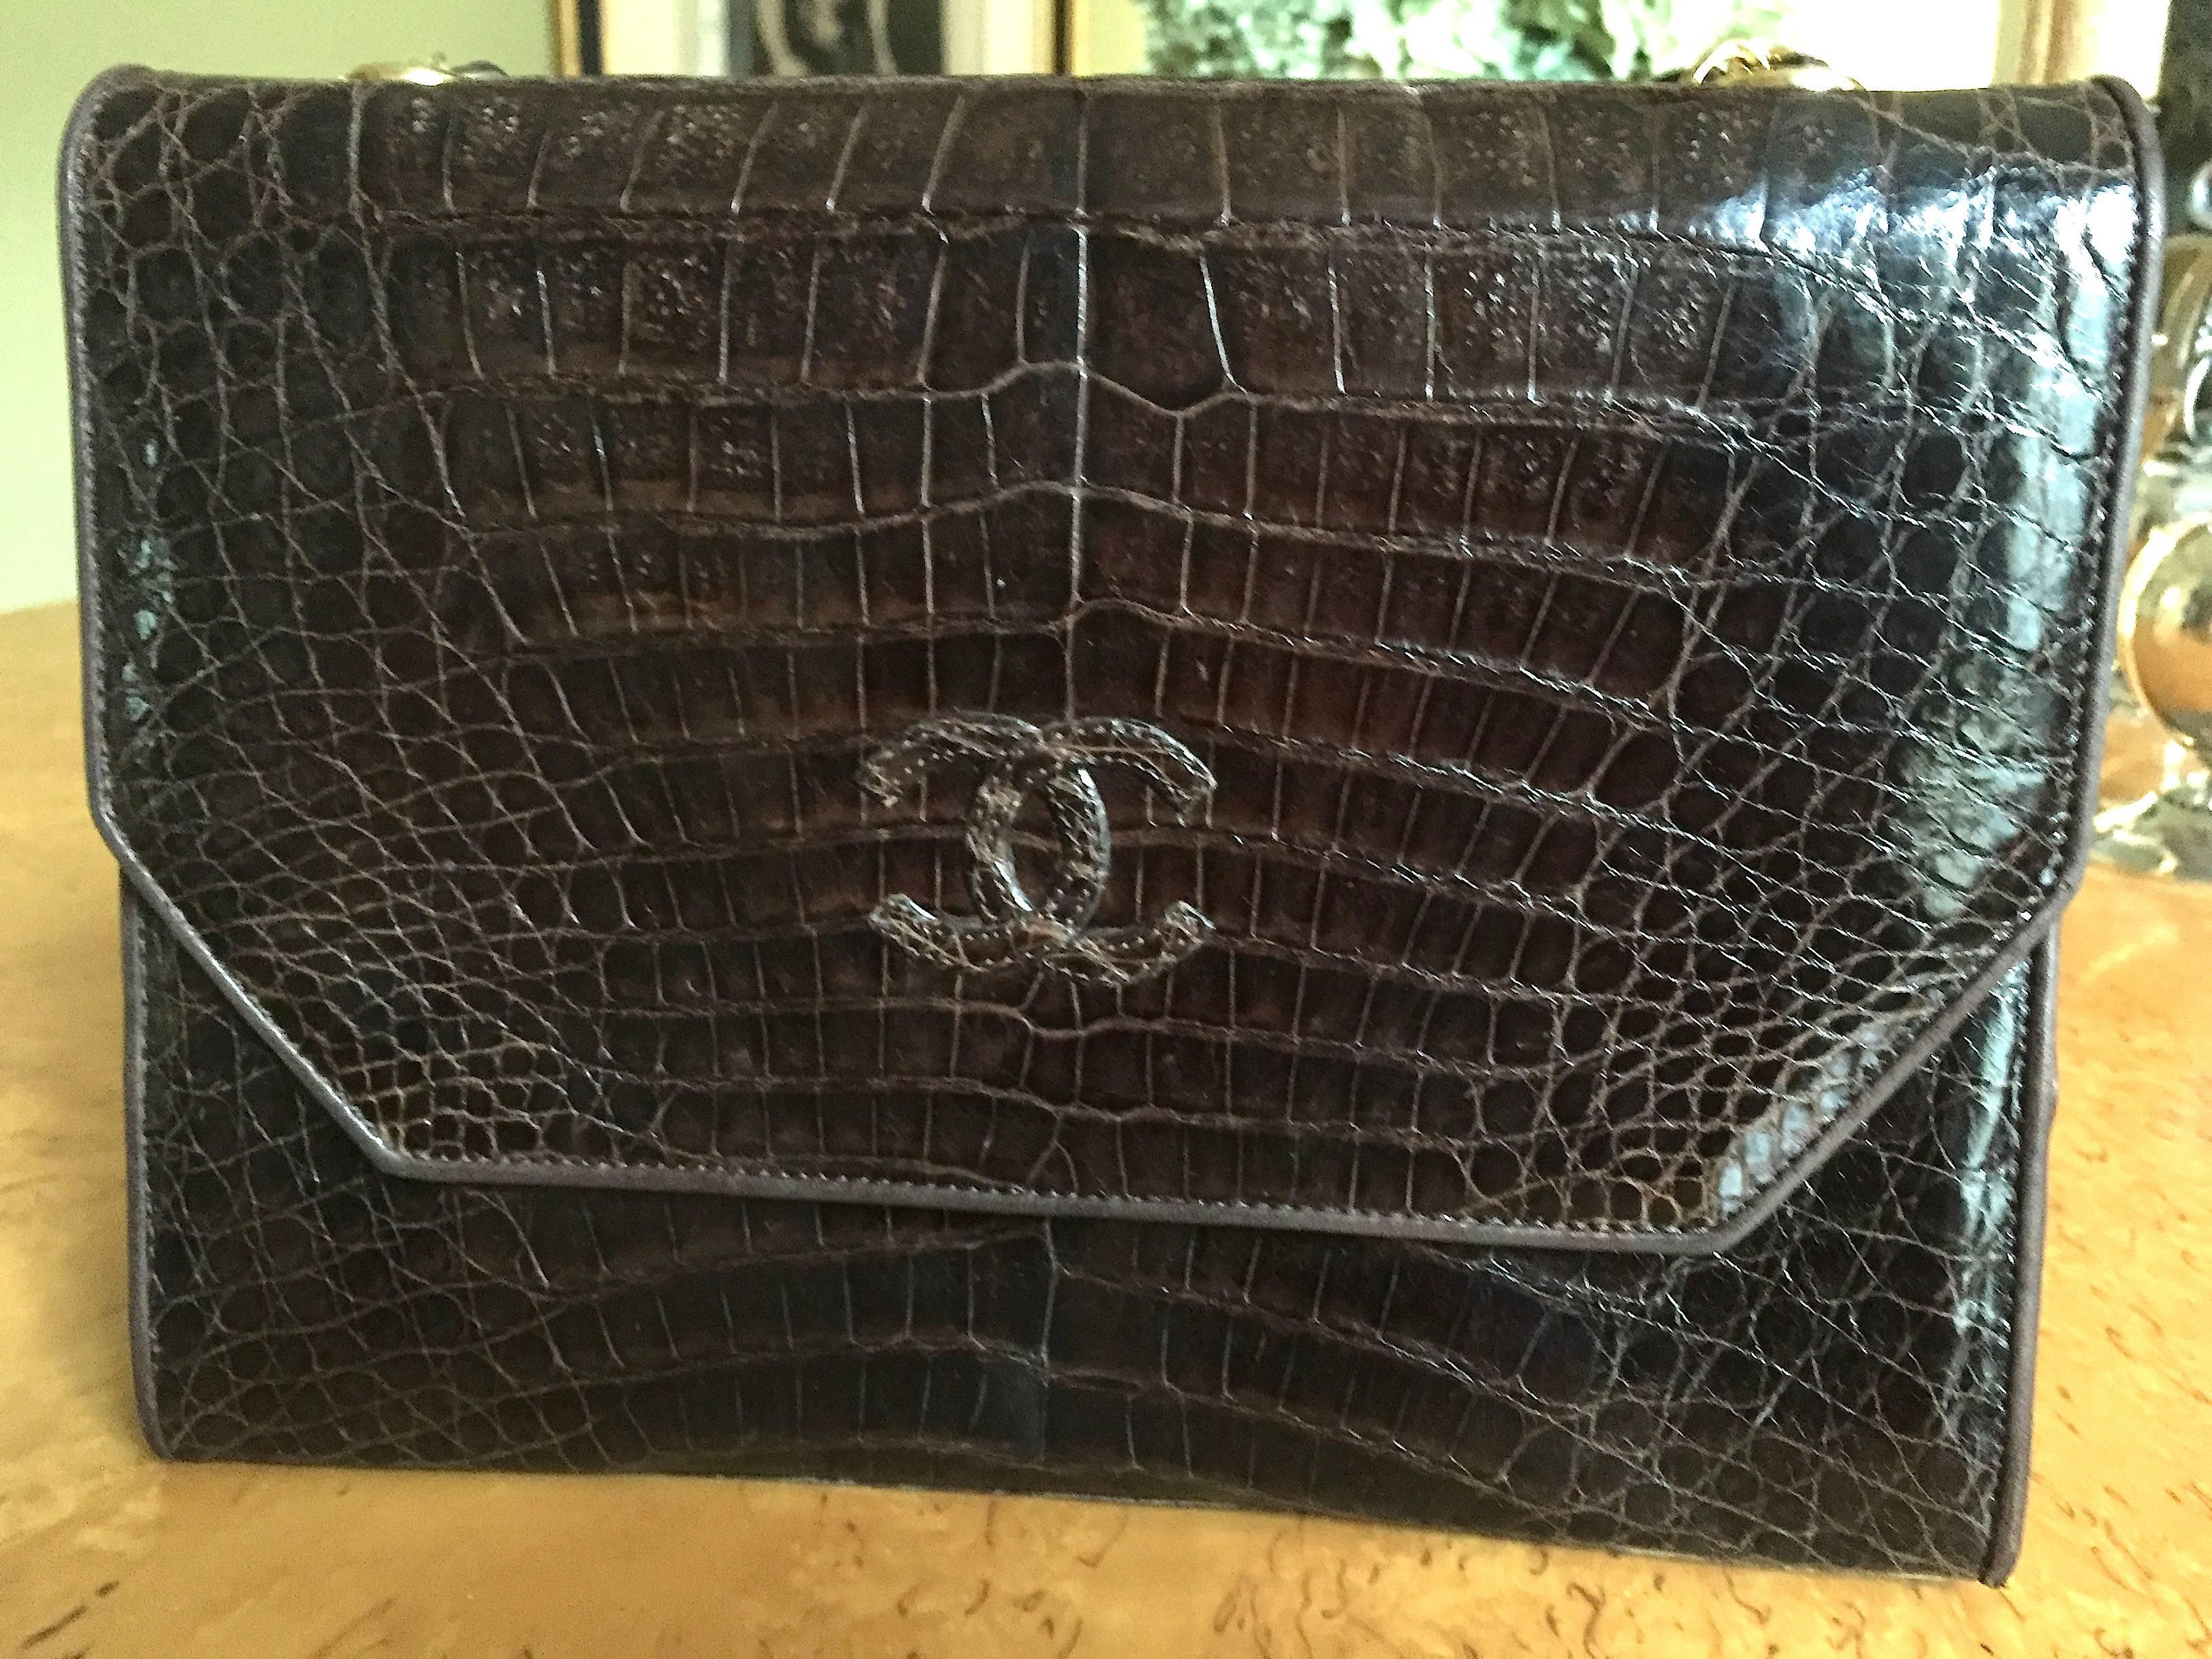 Classic  Vintage Brown Crocodile Flap Bag with Gold Hardware from Chanel.
9 